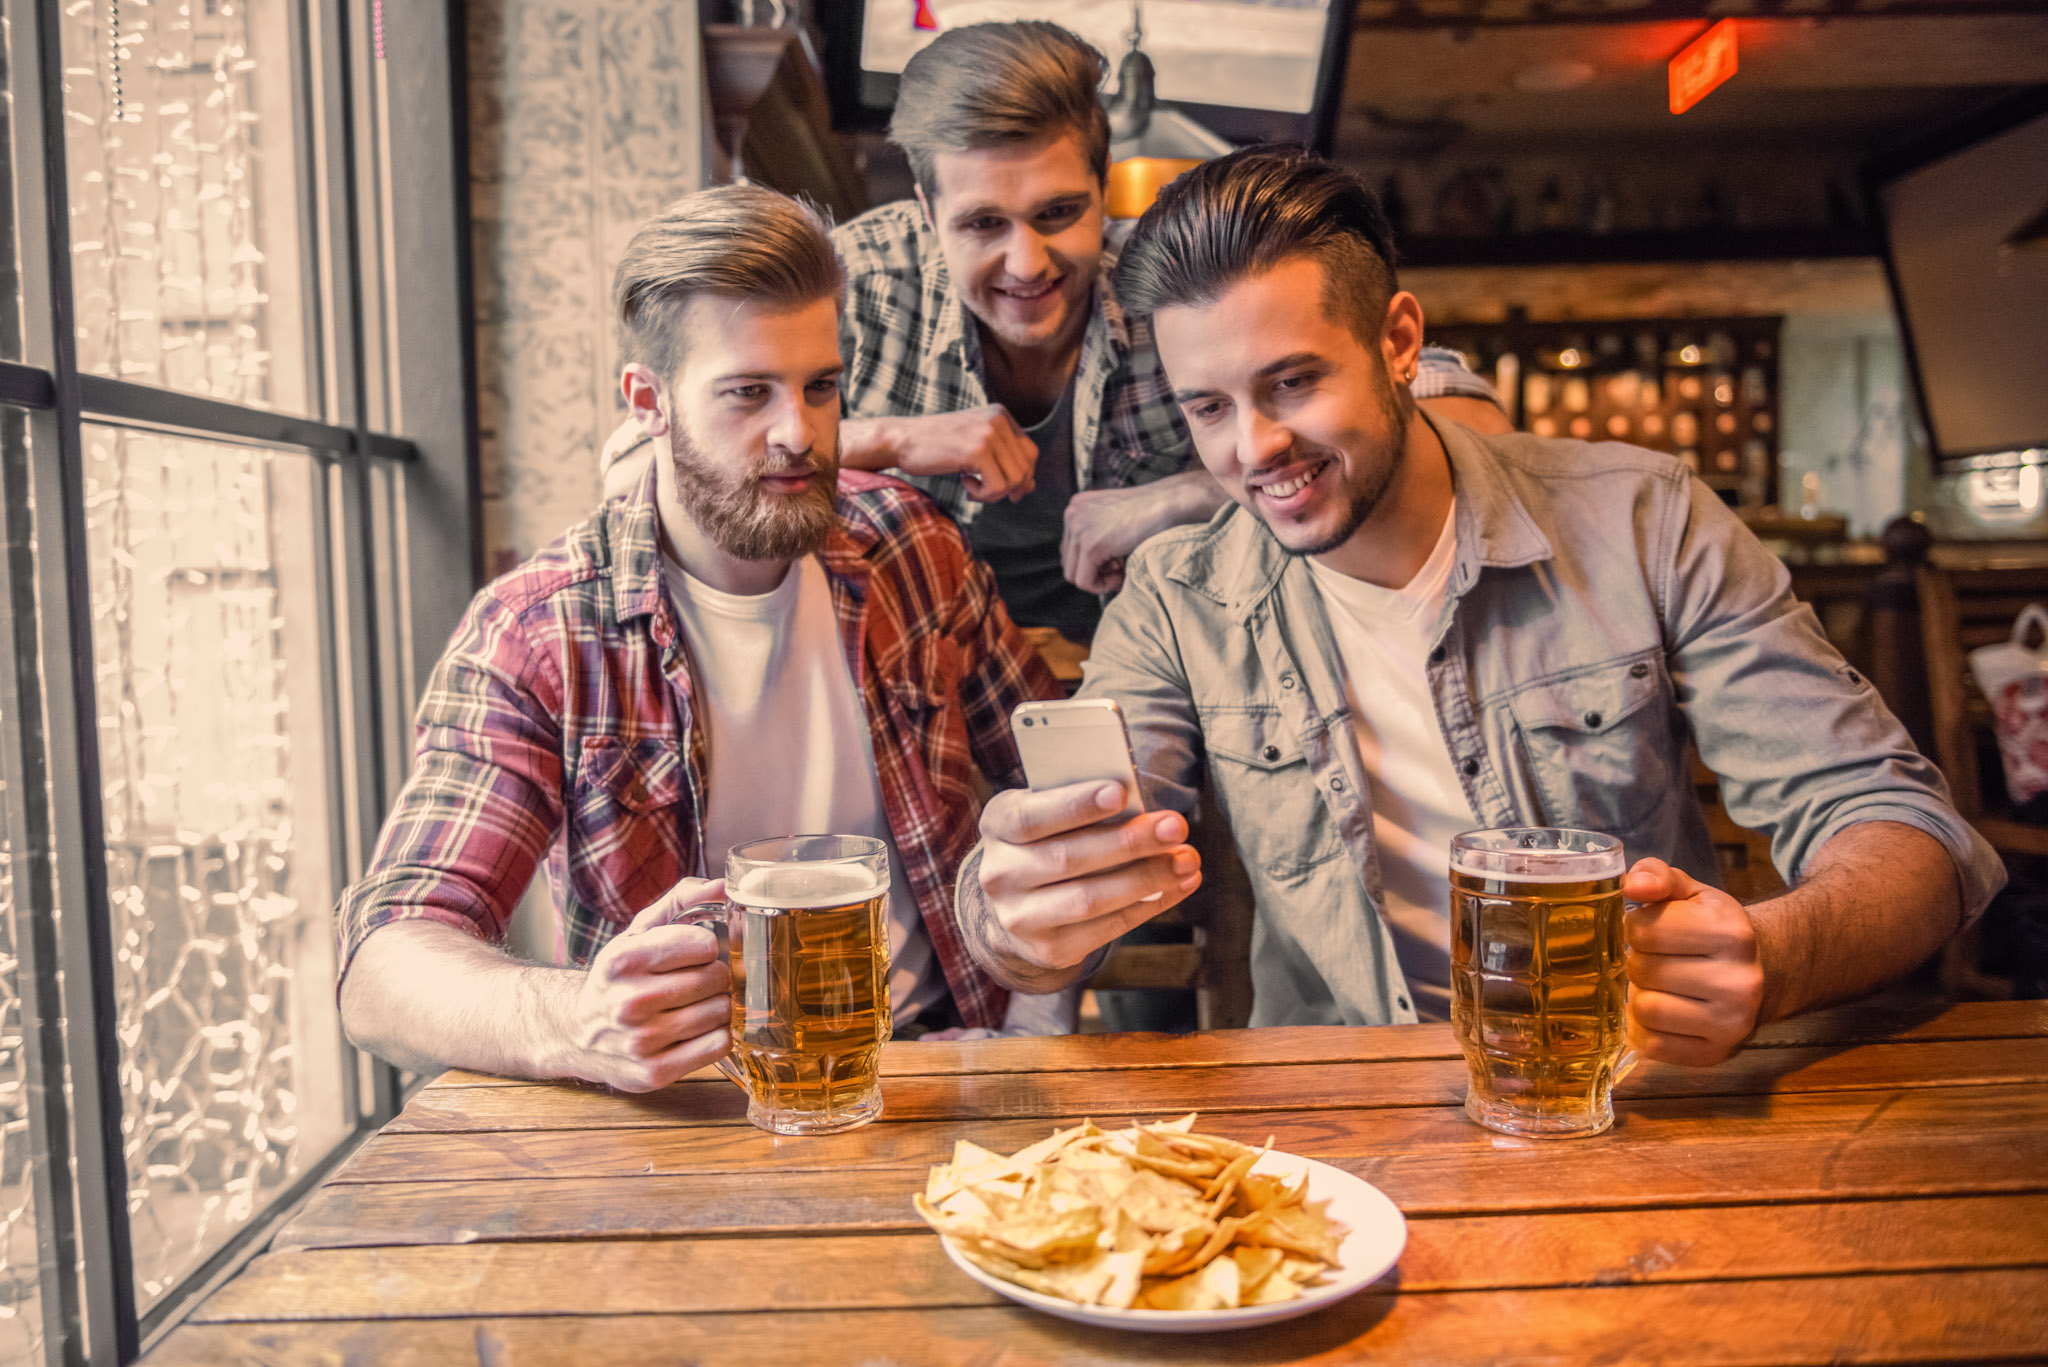 stock photo of three bearded men with excessive amounts of gel in their hair, drinking beer in a pub while looking at a smartphone